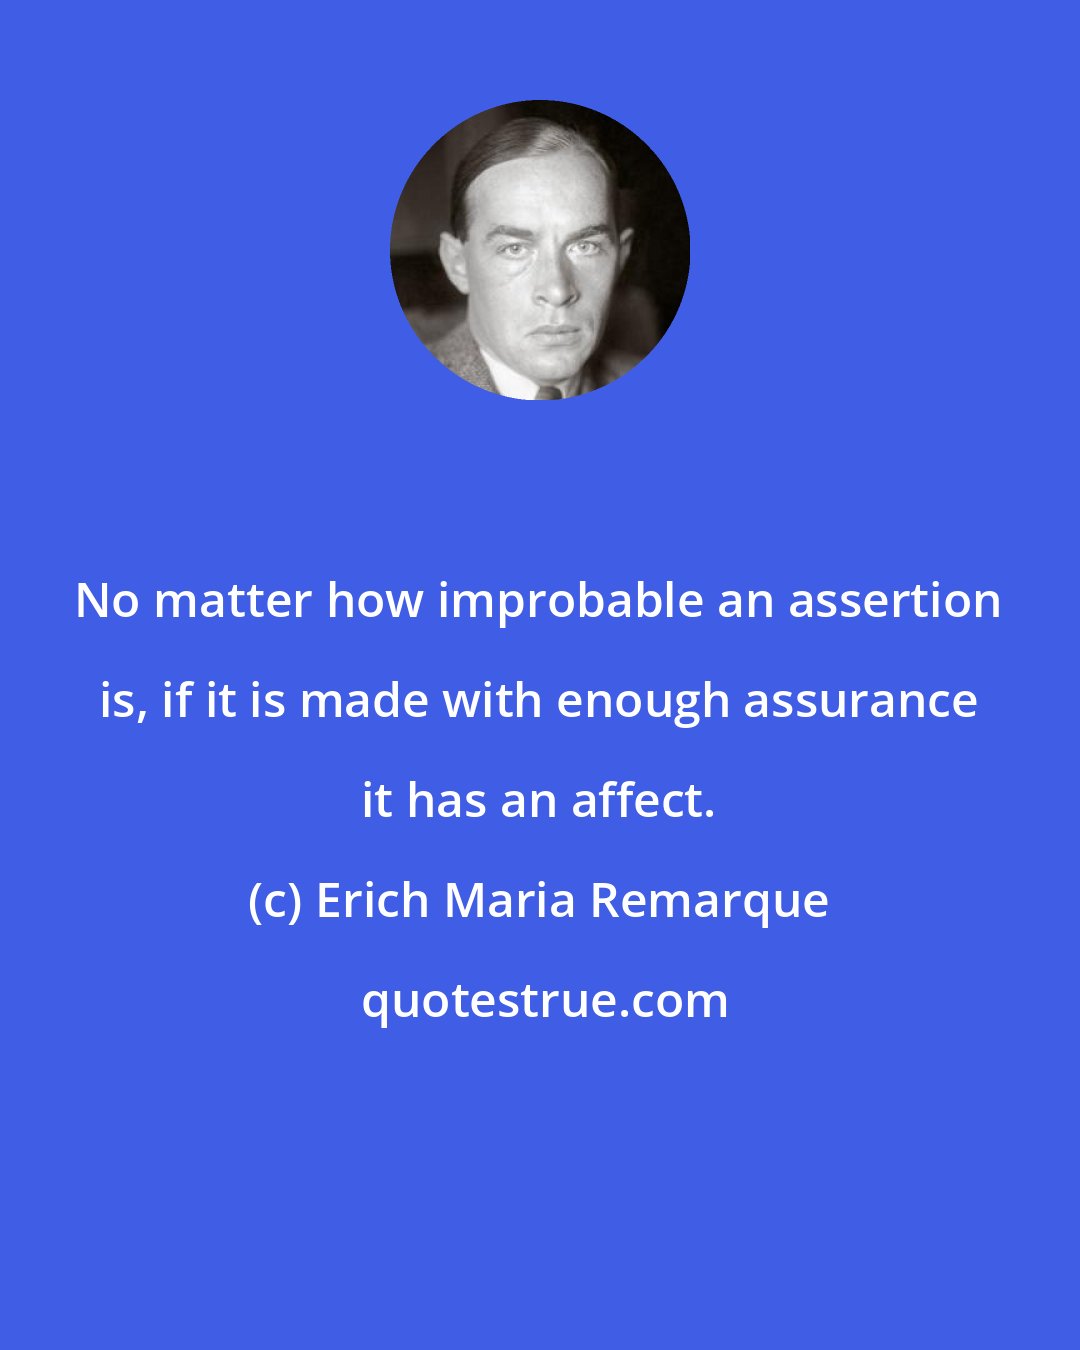 Erich Maria Remarque: No matter how improbable an assertion is, if it is made with enough assurance it has an affect.